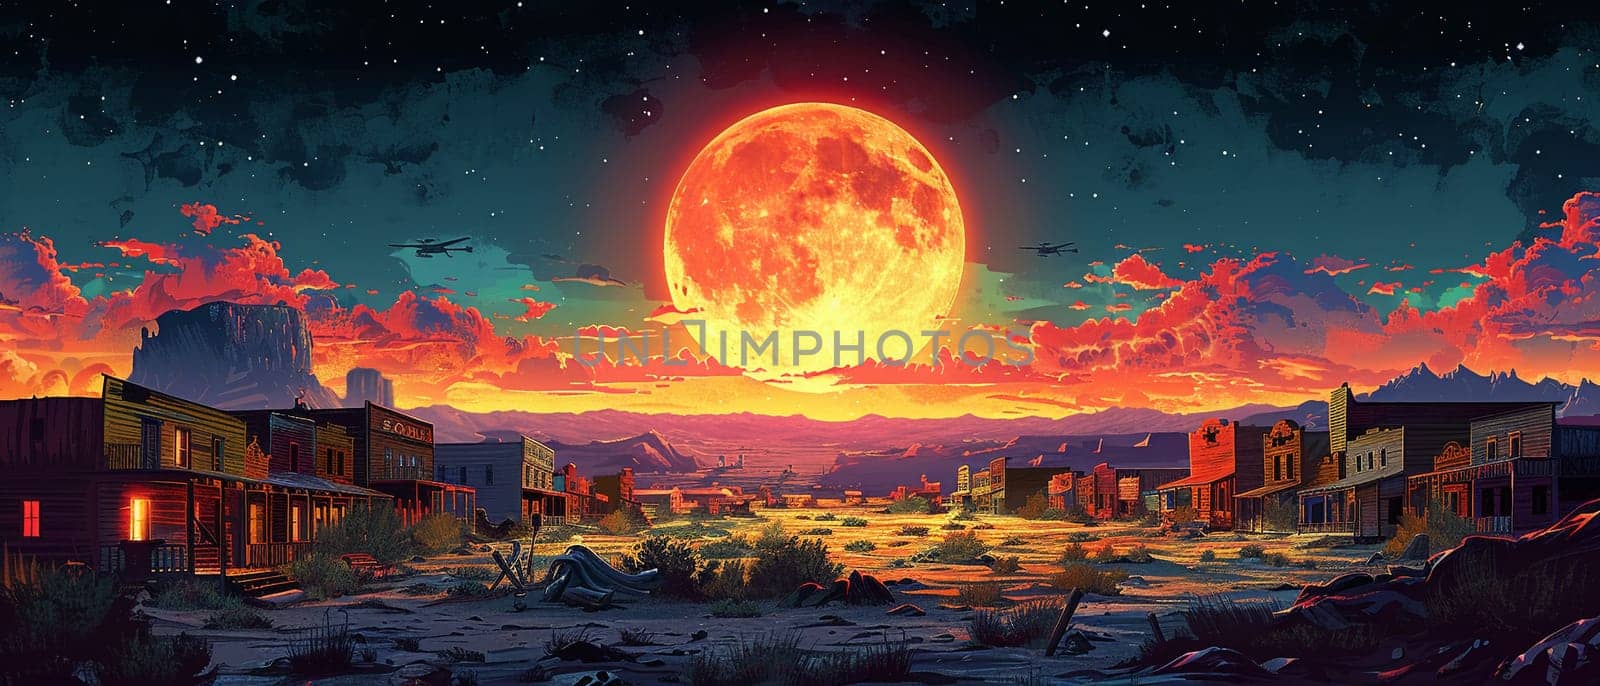 Wild west town at high noon, captured in a spaghetti western illustration with heat and tension.